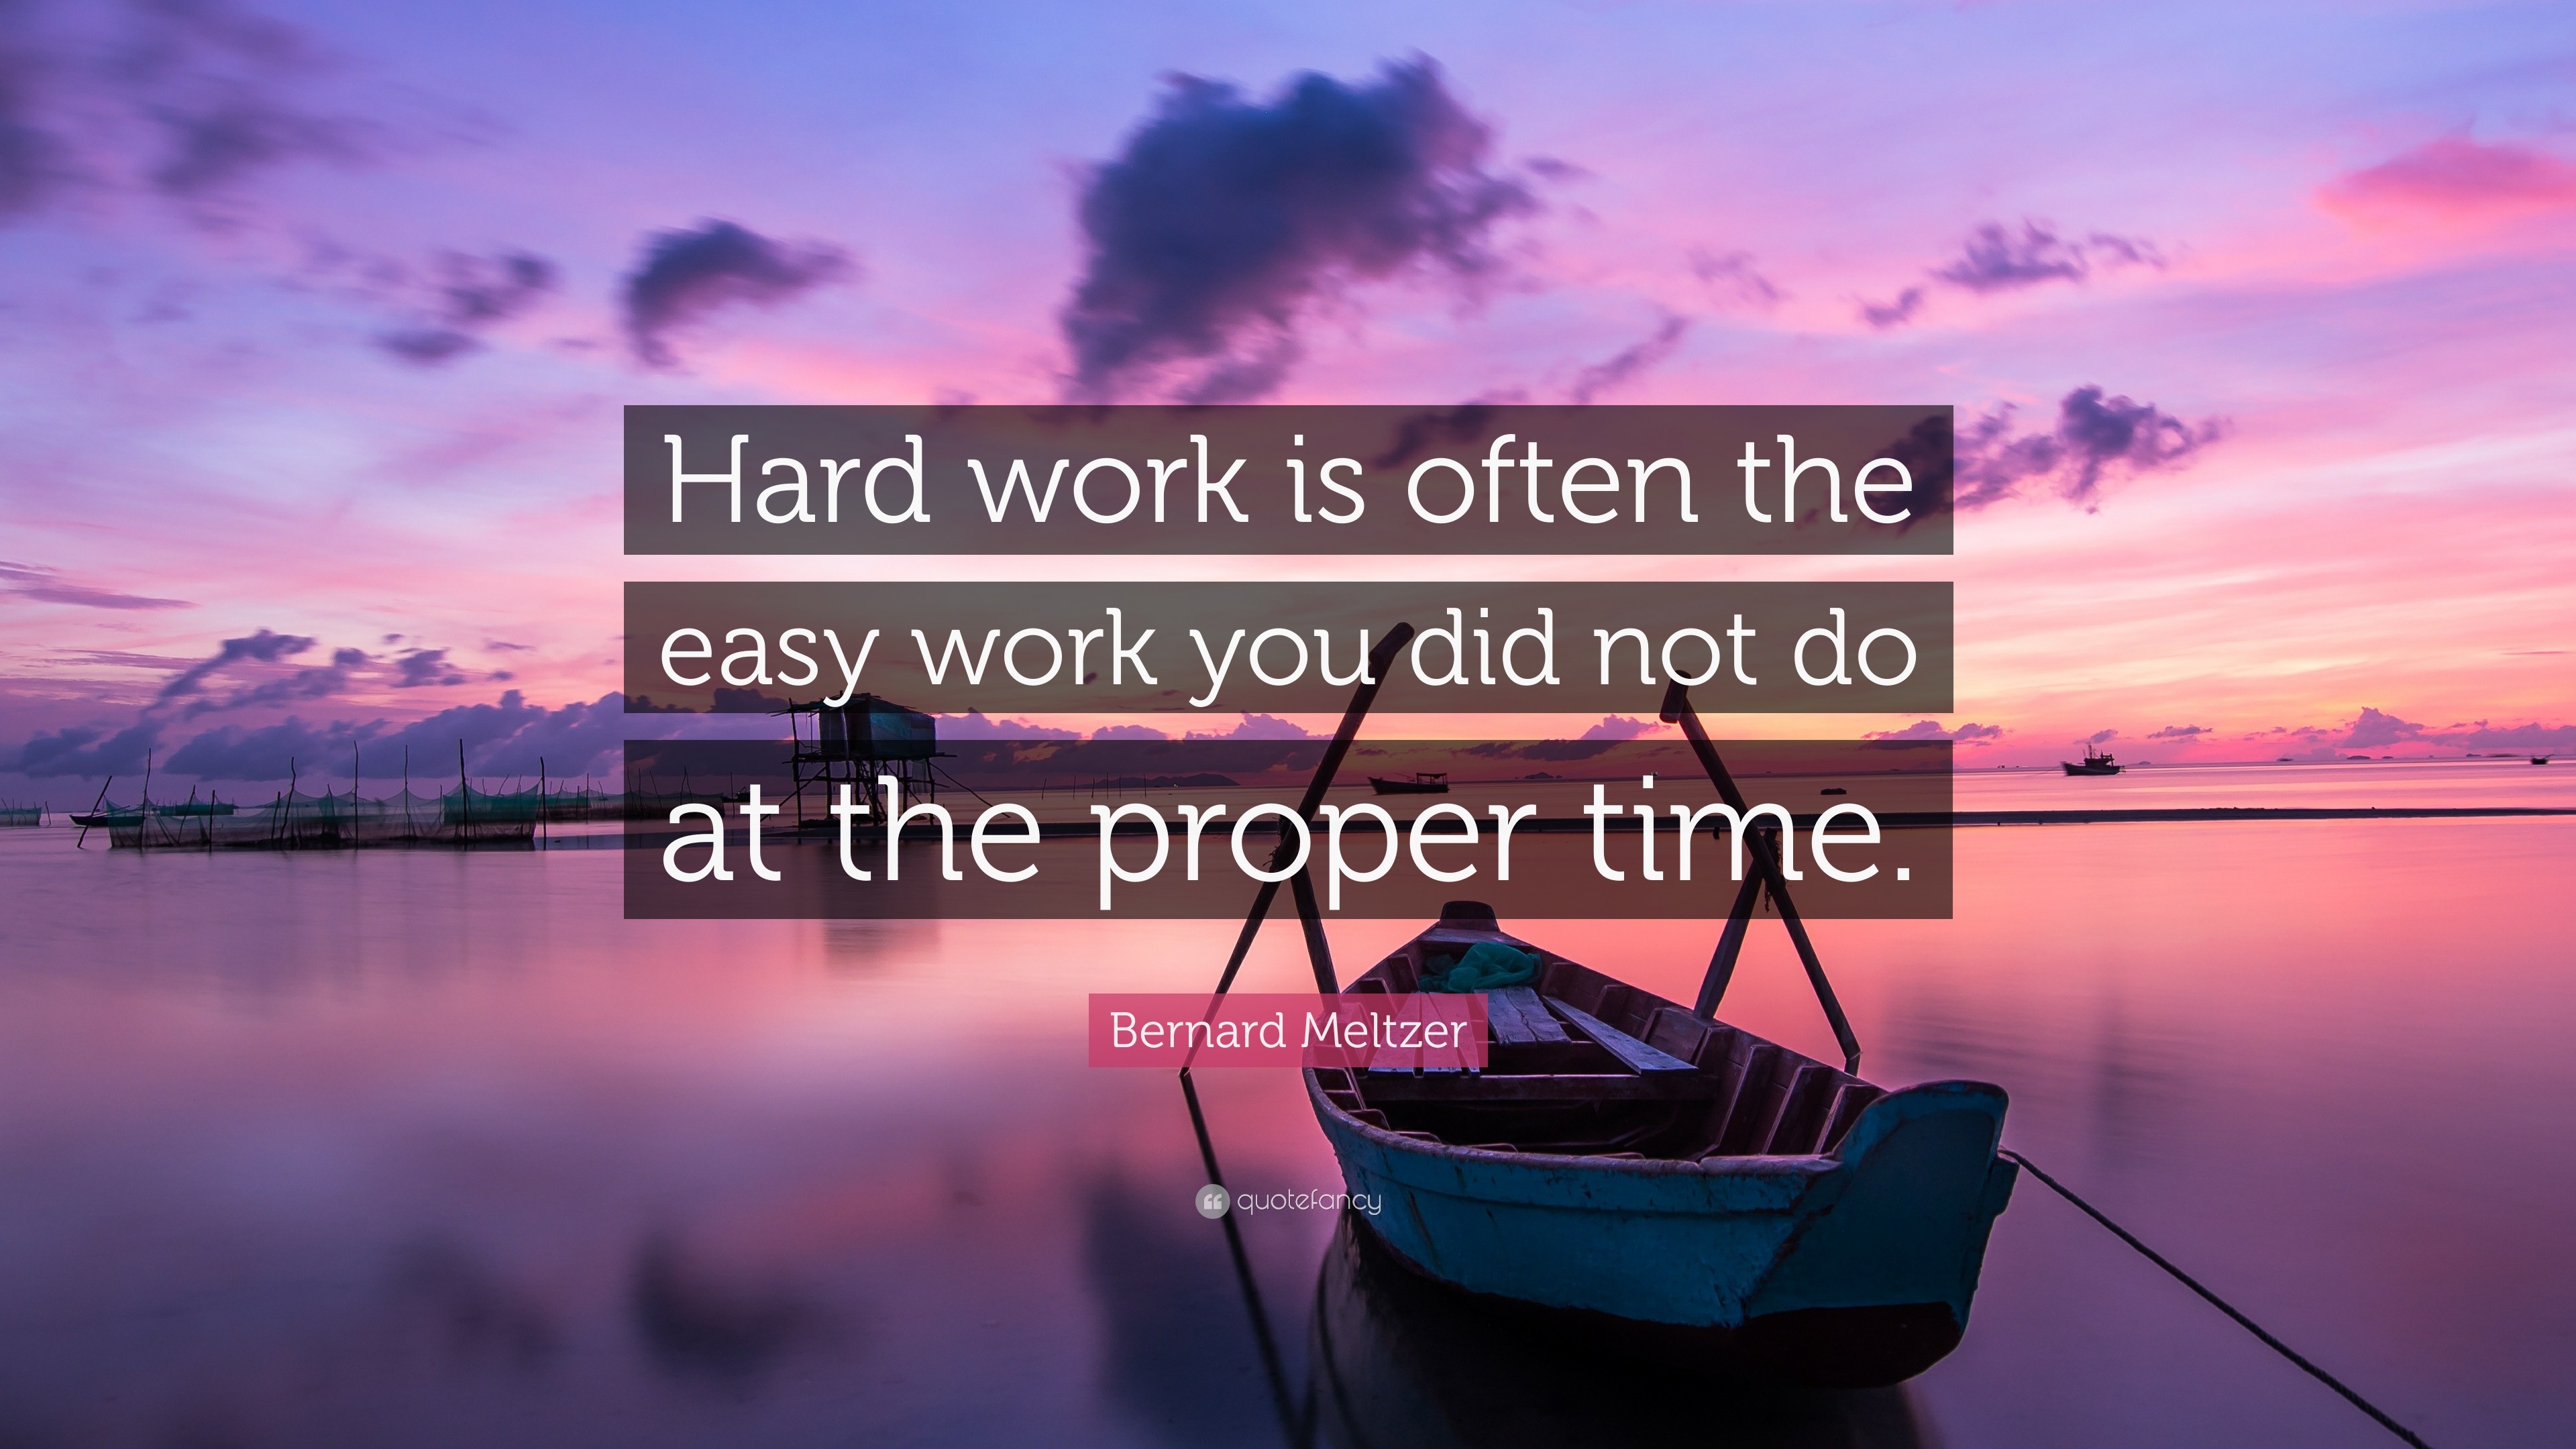 Bernard Meltzer Quote: “Hard work is often the easy work you did not do ...